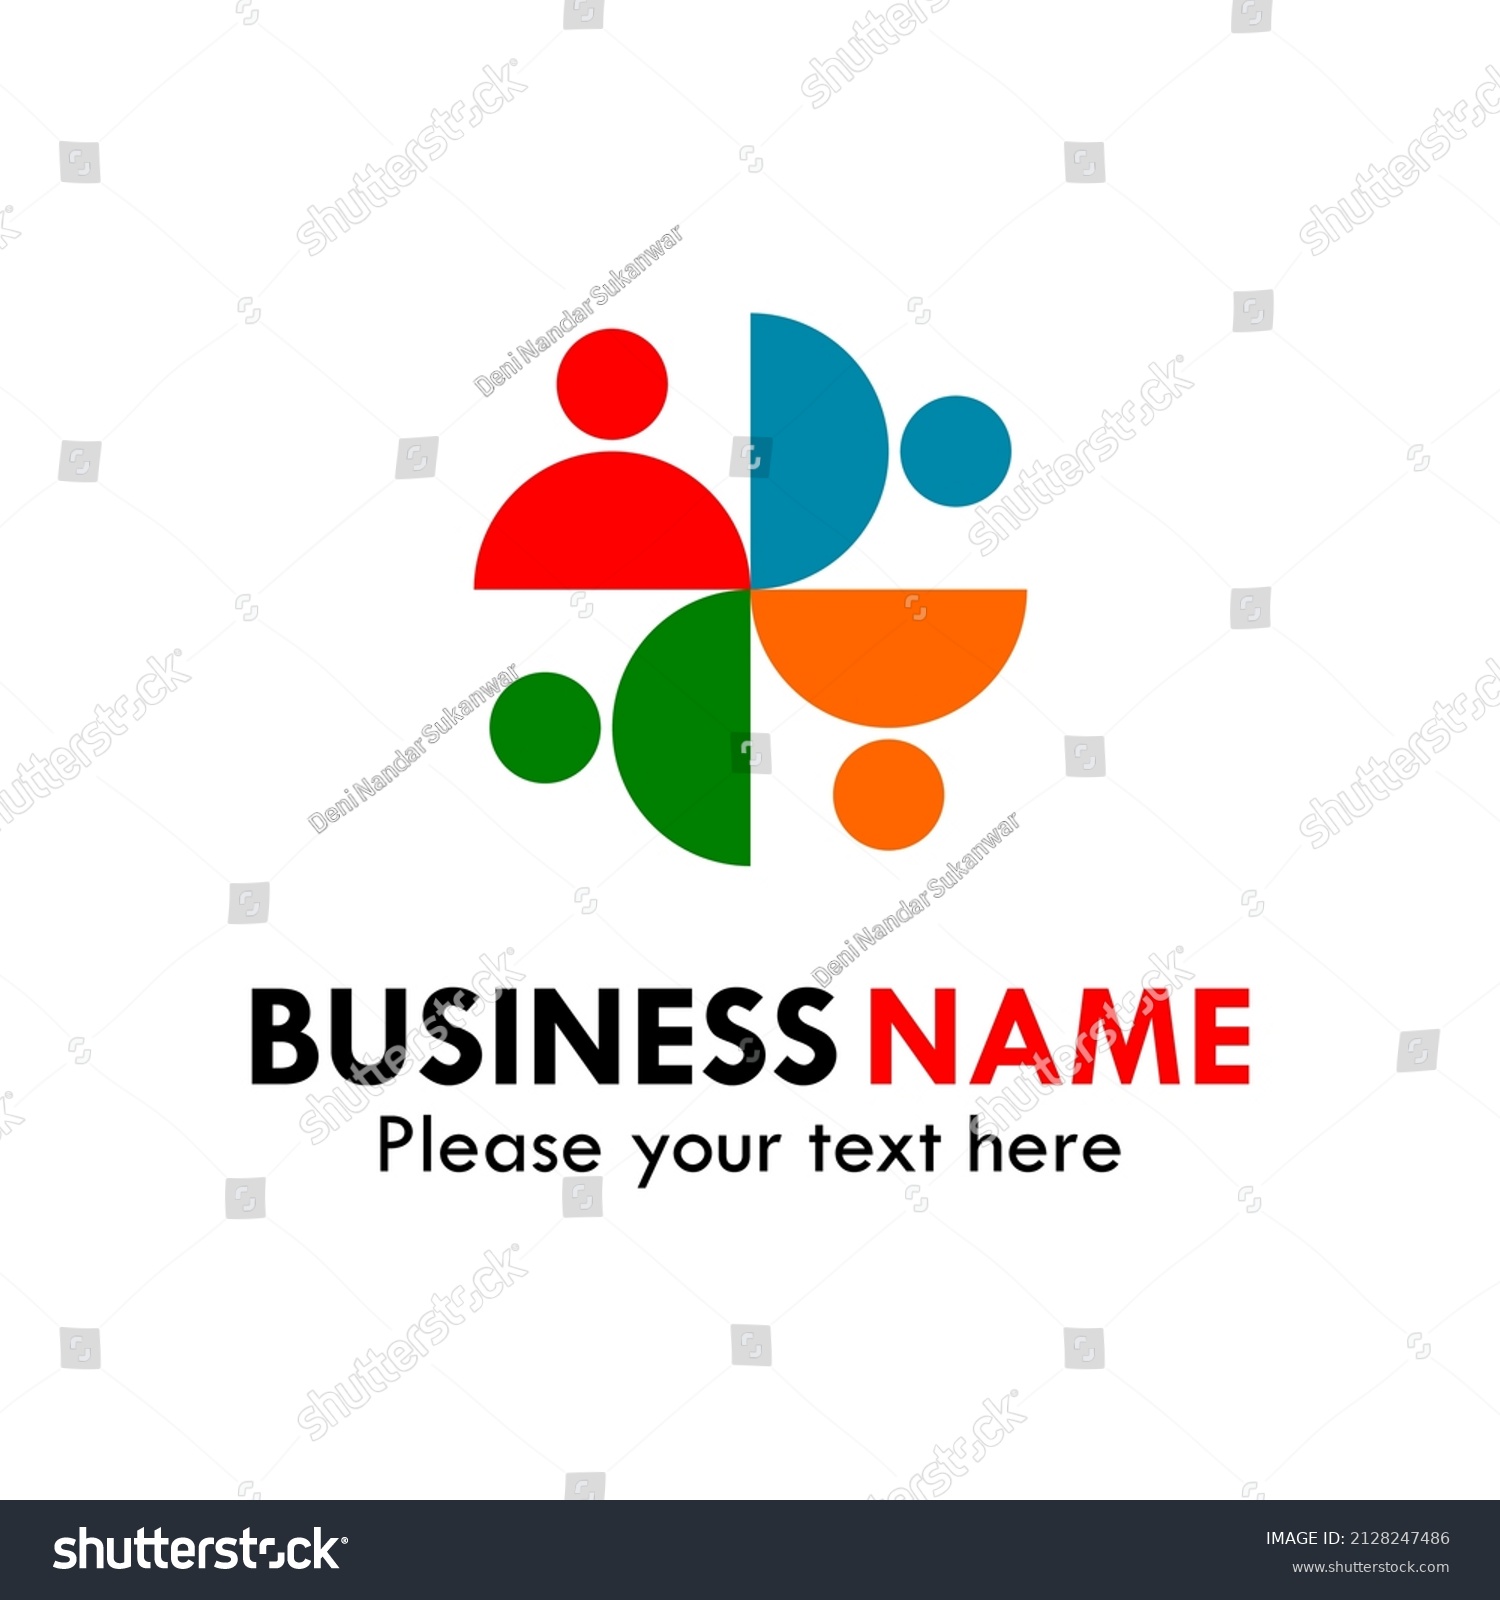 62 Consultaning Images, Stock Photos & Vectors | Shutterstock